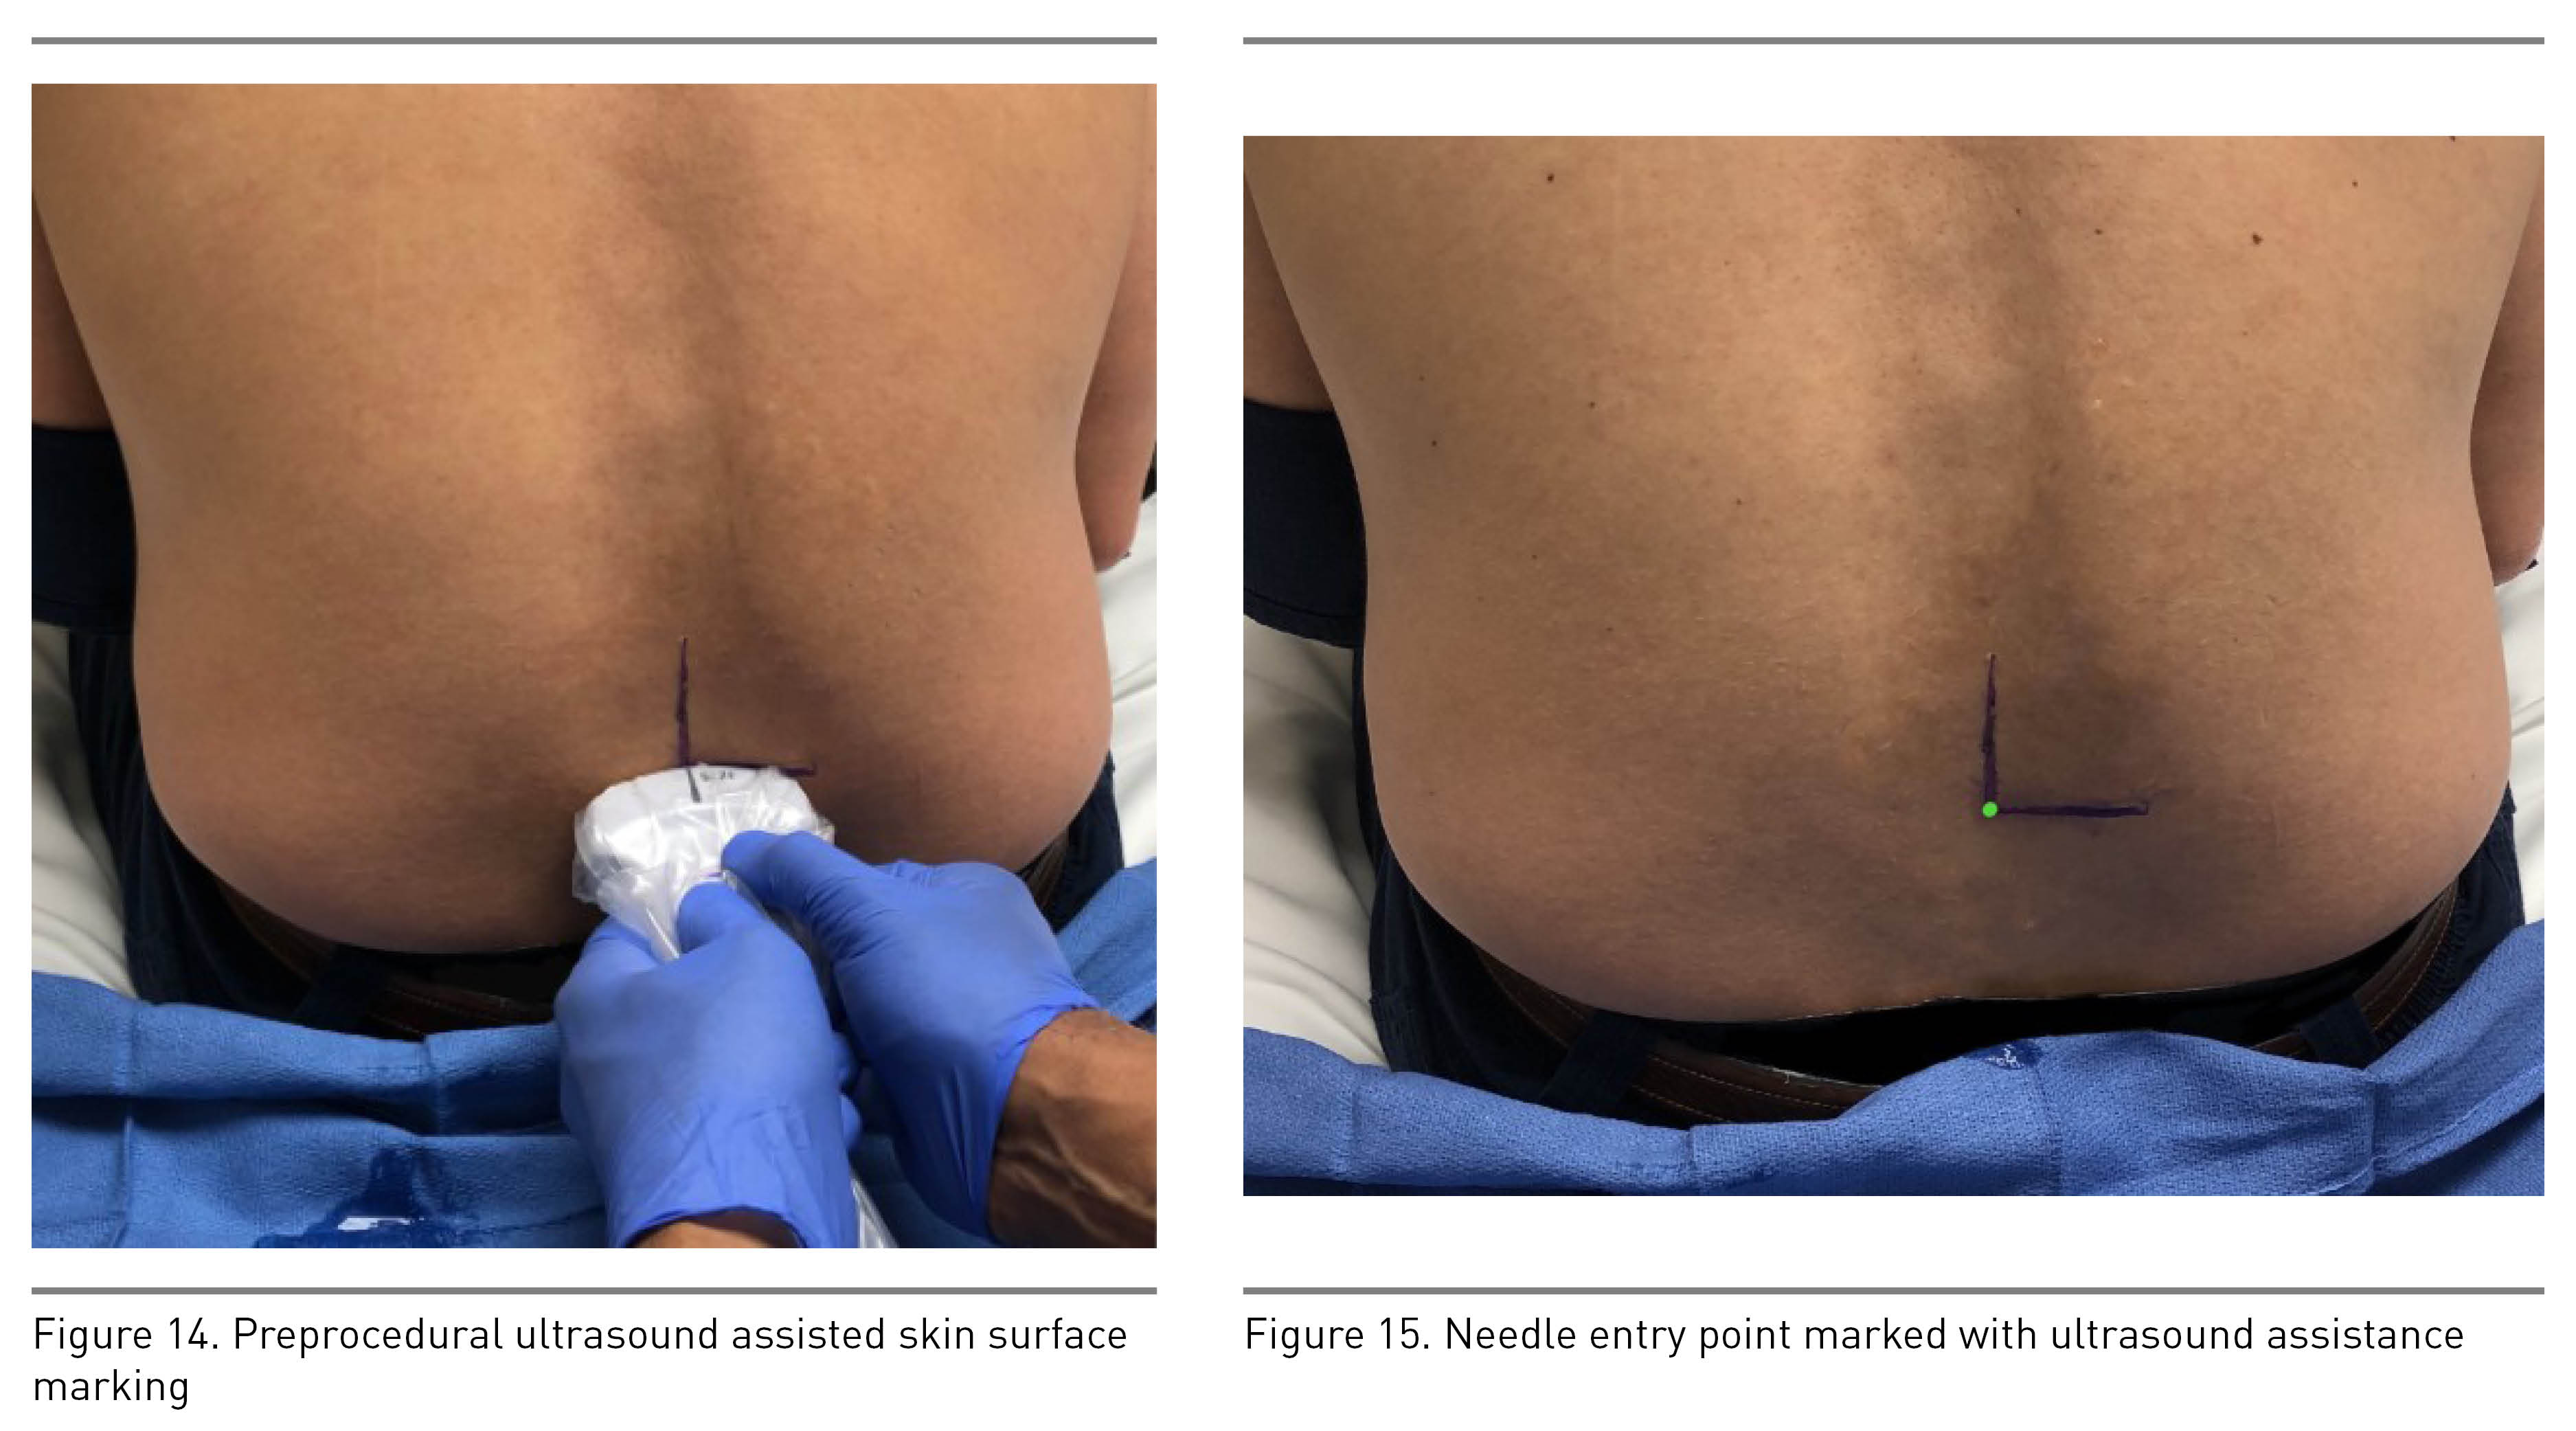 Figures 14 (preprocedural ultrasound-assisted skin surface marking) and 15 (needle entry point marked with ultrasound assistance)